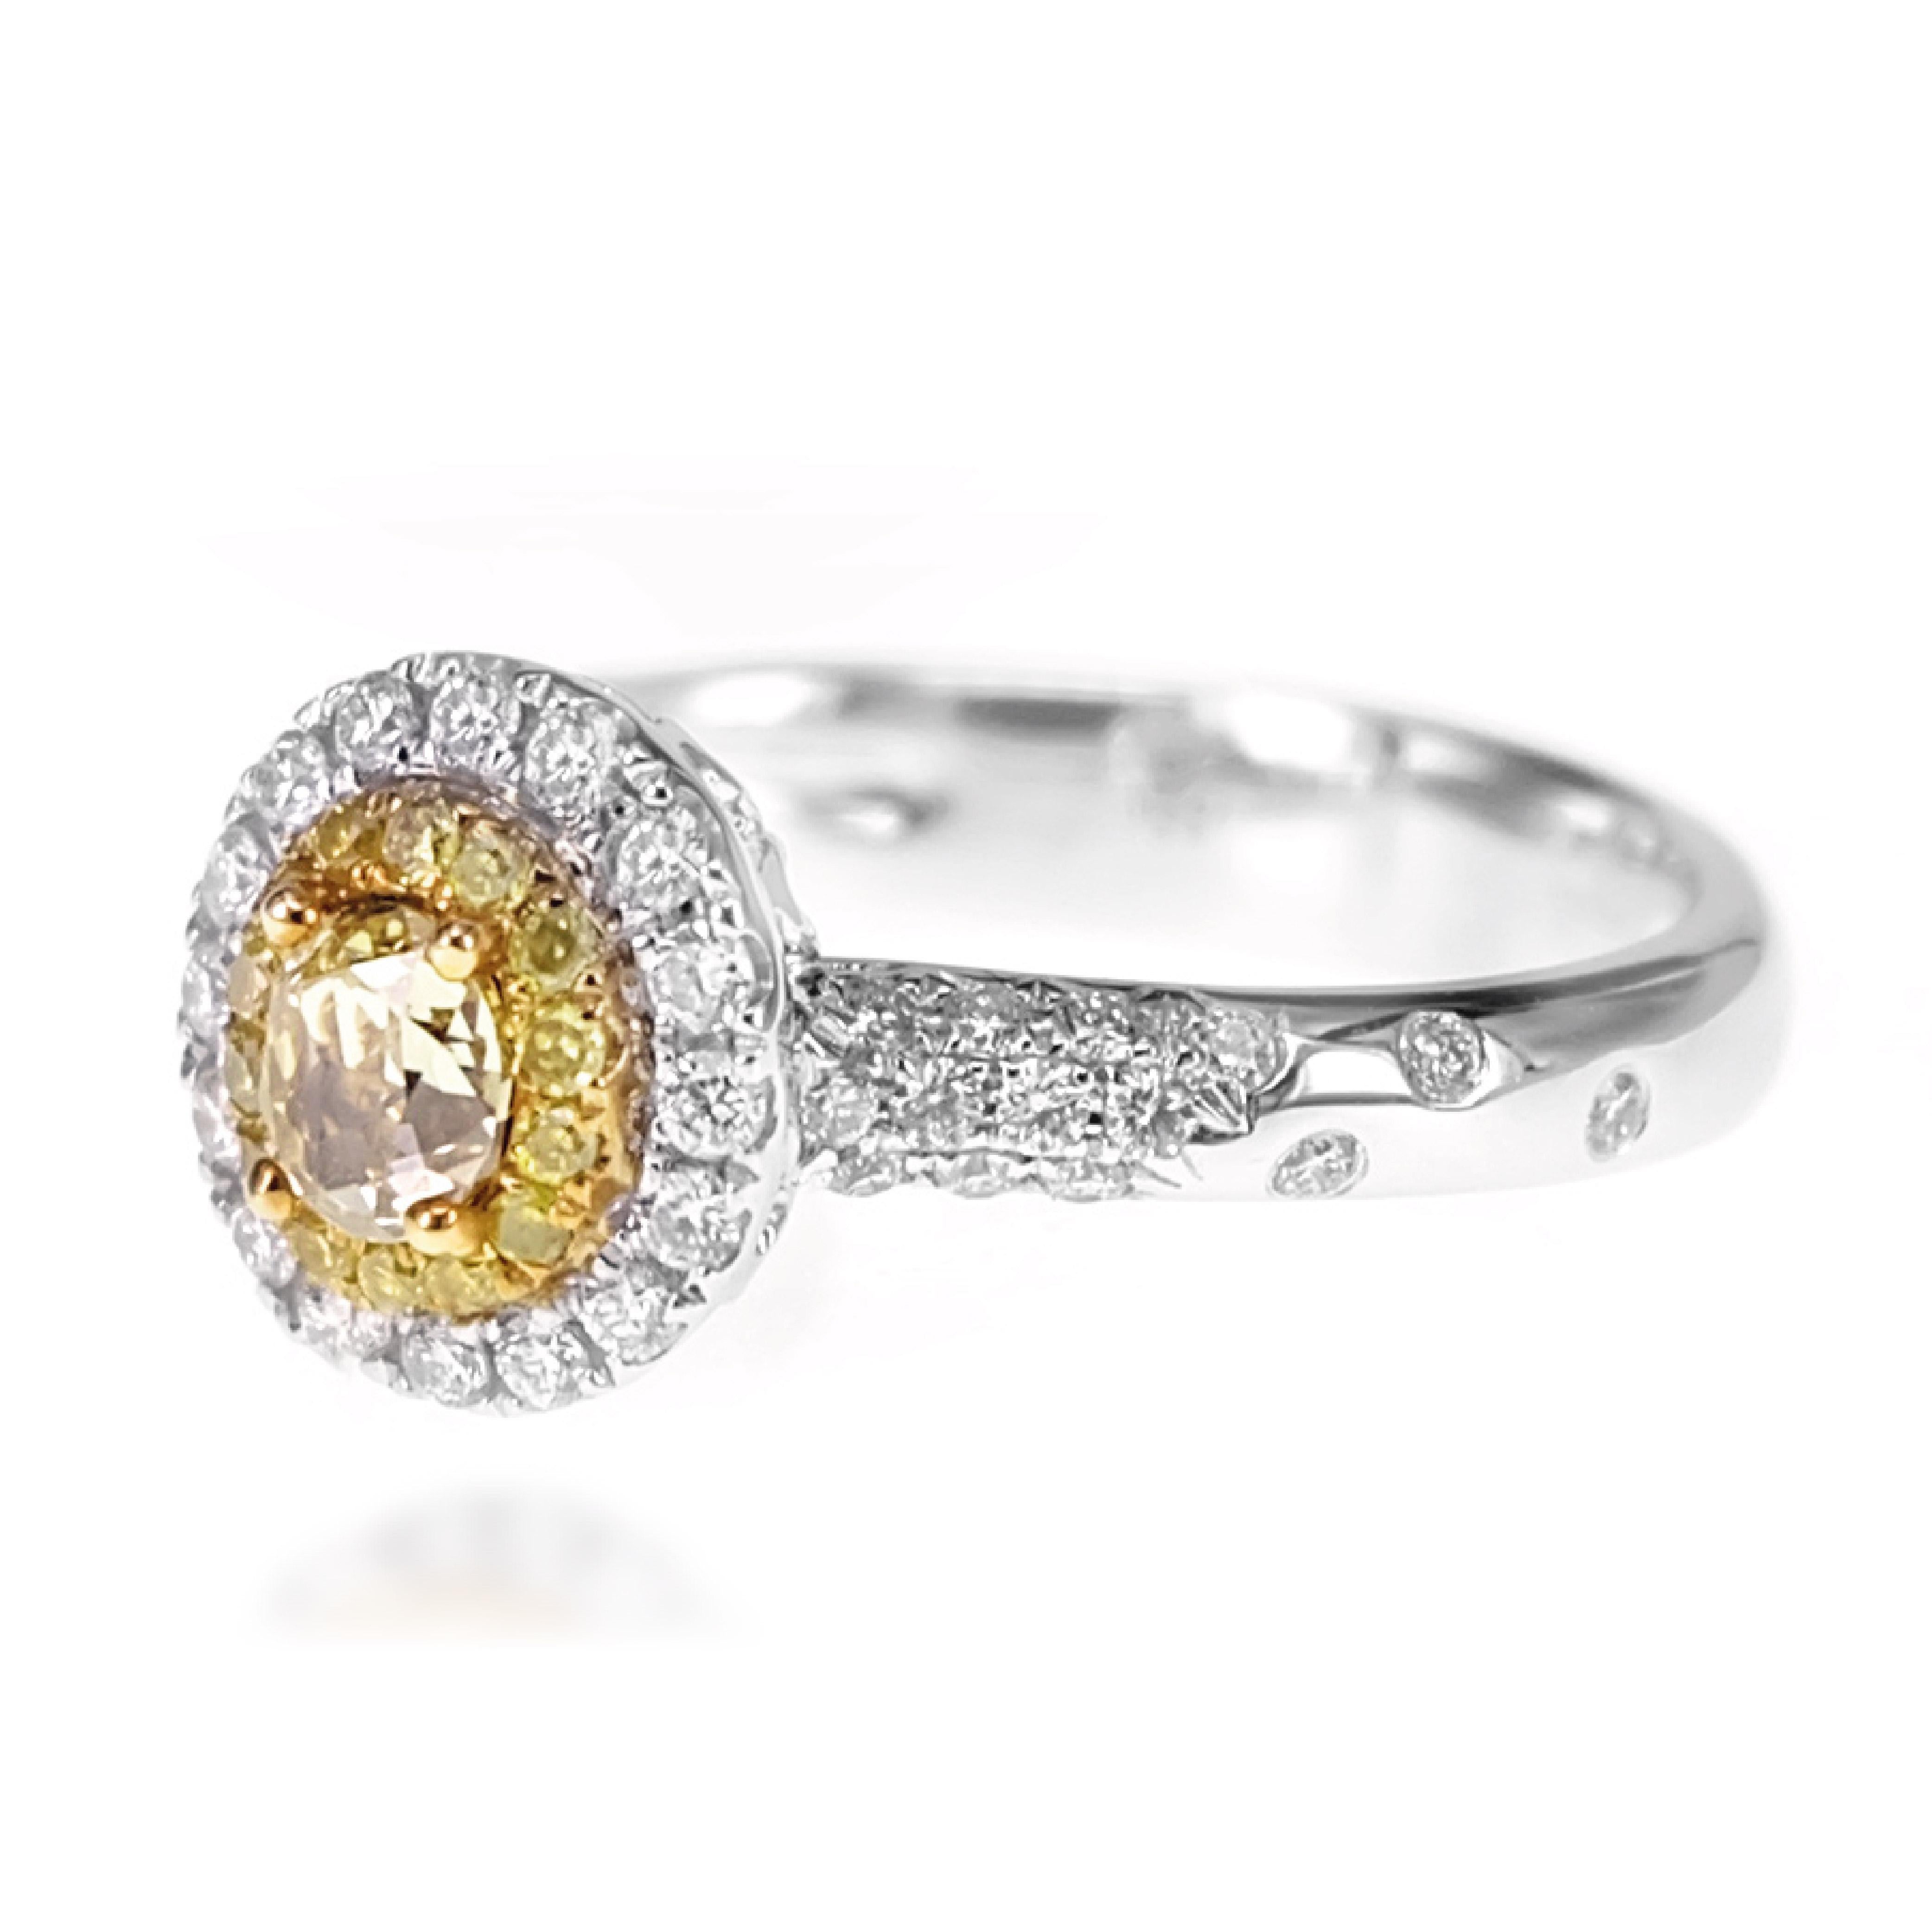 A classical solitaire ring consisting of 0.29 carats of fancy intense yellow diamond and 0.39 carats of white brilliant round diamond. 
The details of the ring are as follows:
Color: F
Clarity: Vs
Ring Size: 6.25
The ring size can be changed as per